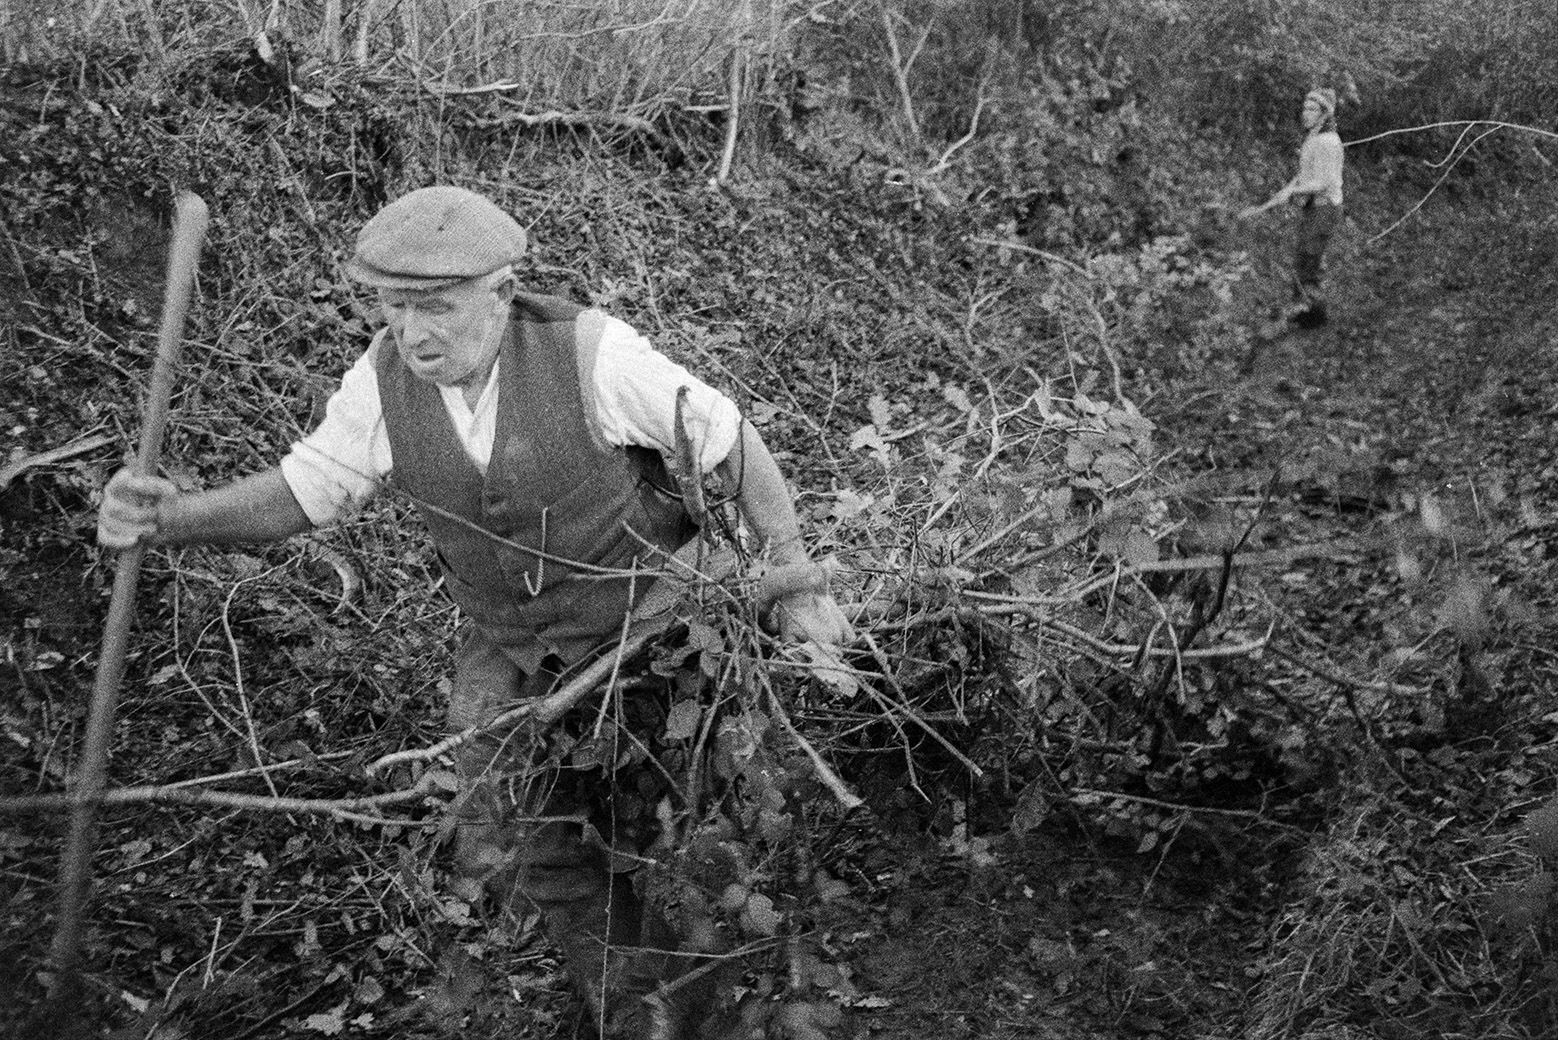 Tom Hooper carrying trimmings from hedge cutting along Green Lane, Beaford, to be burnt. Derek Bright can be seen in the background.